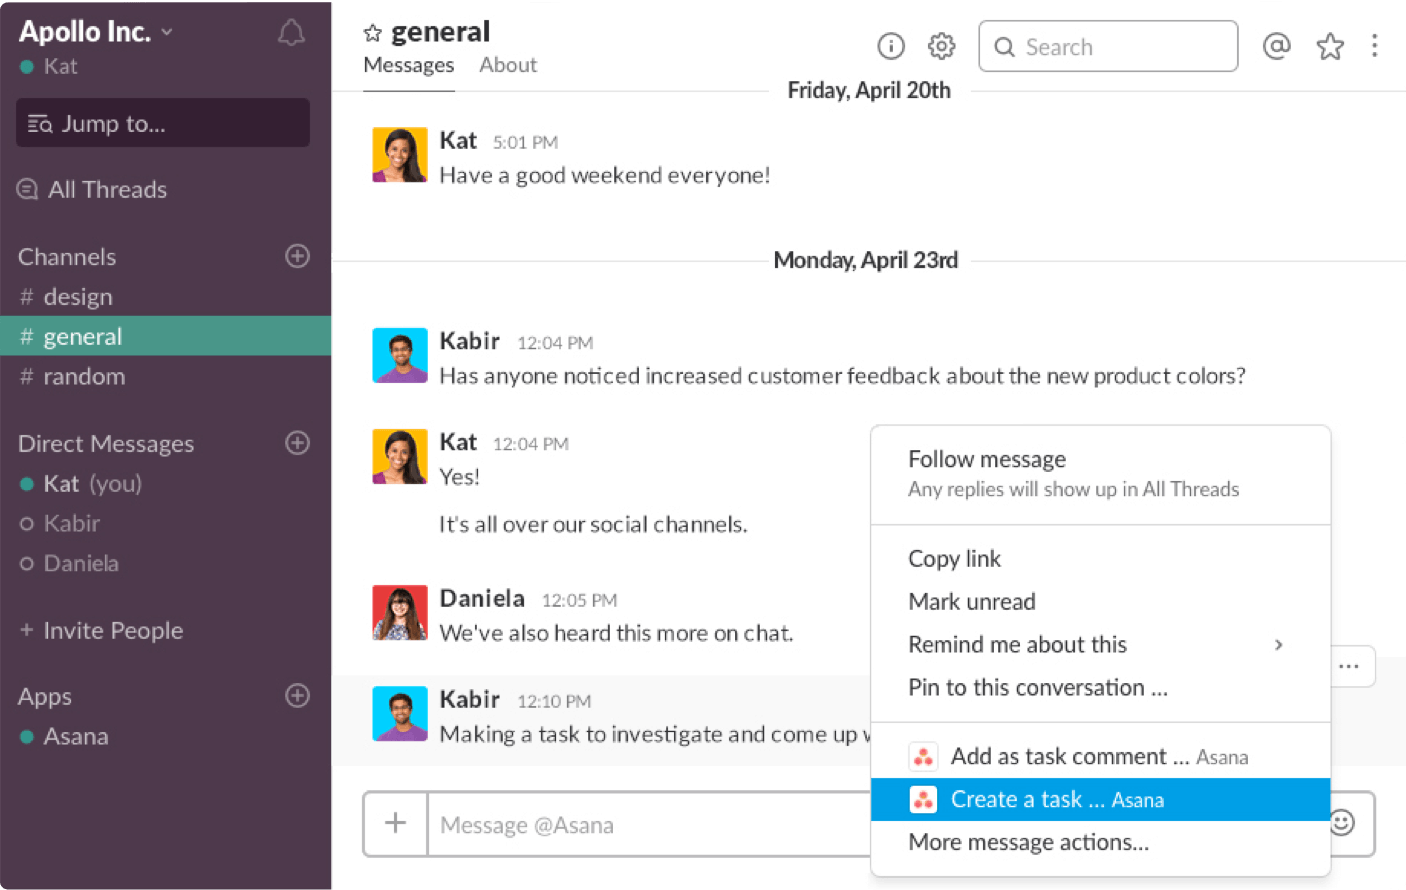 actionable conversations with Asana